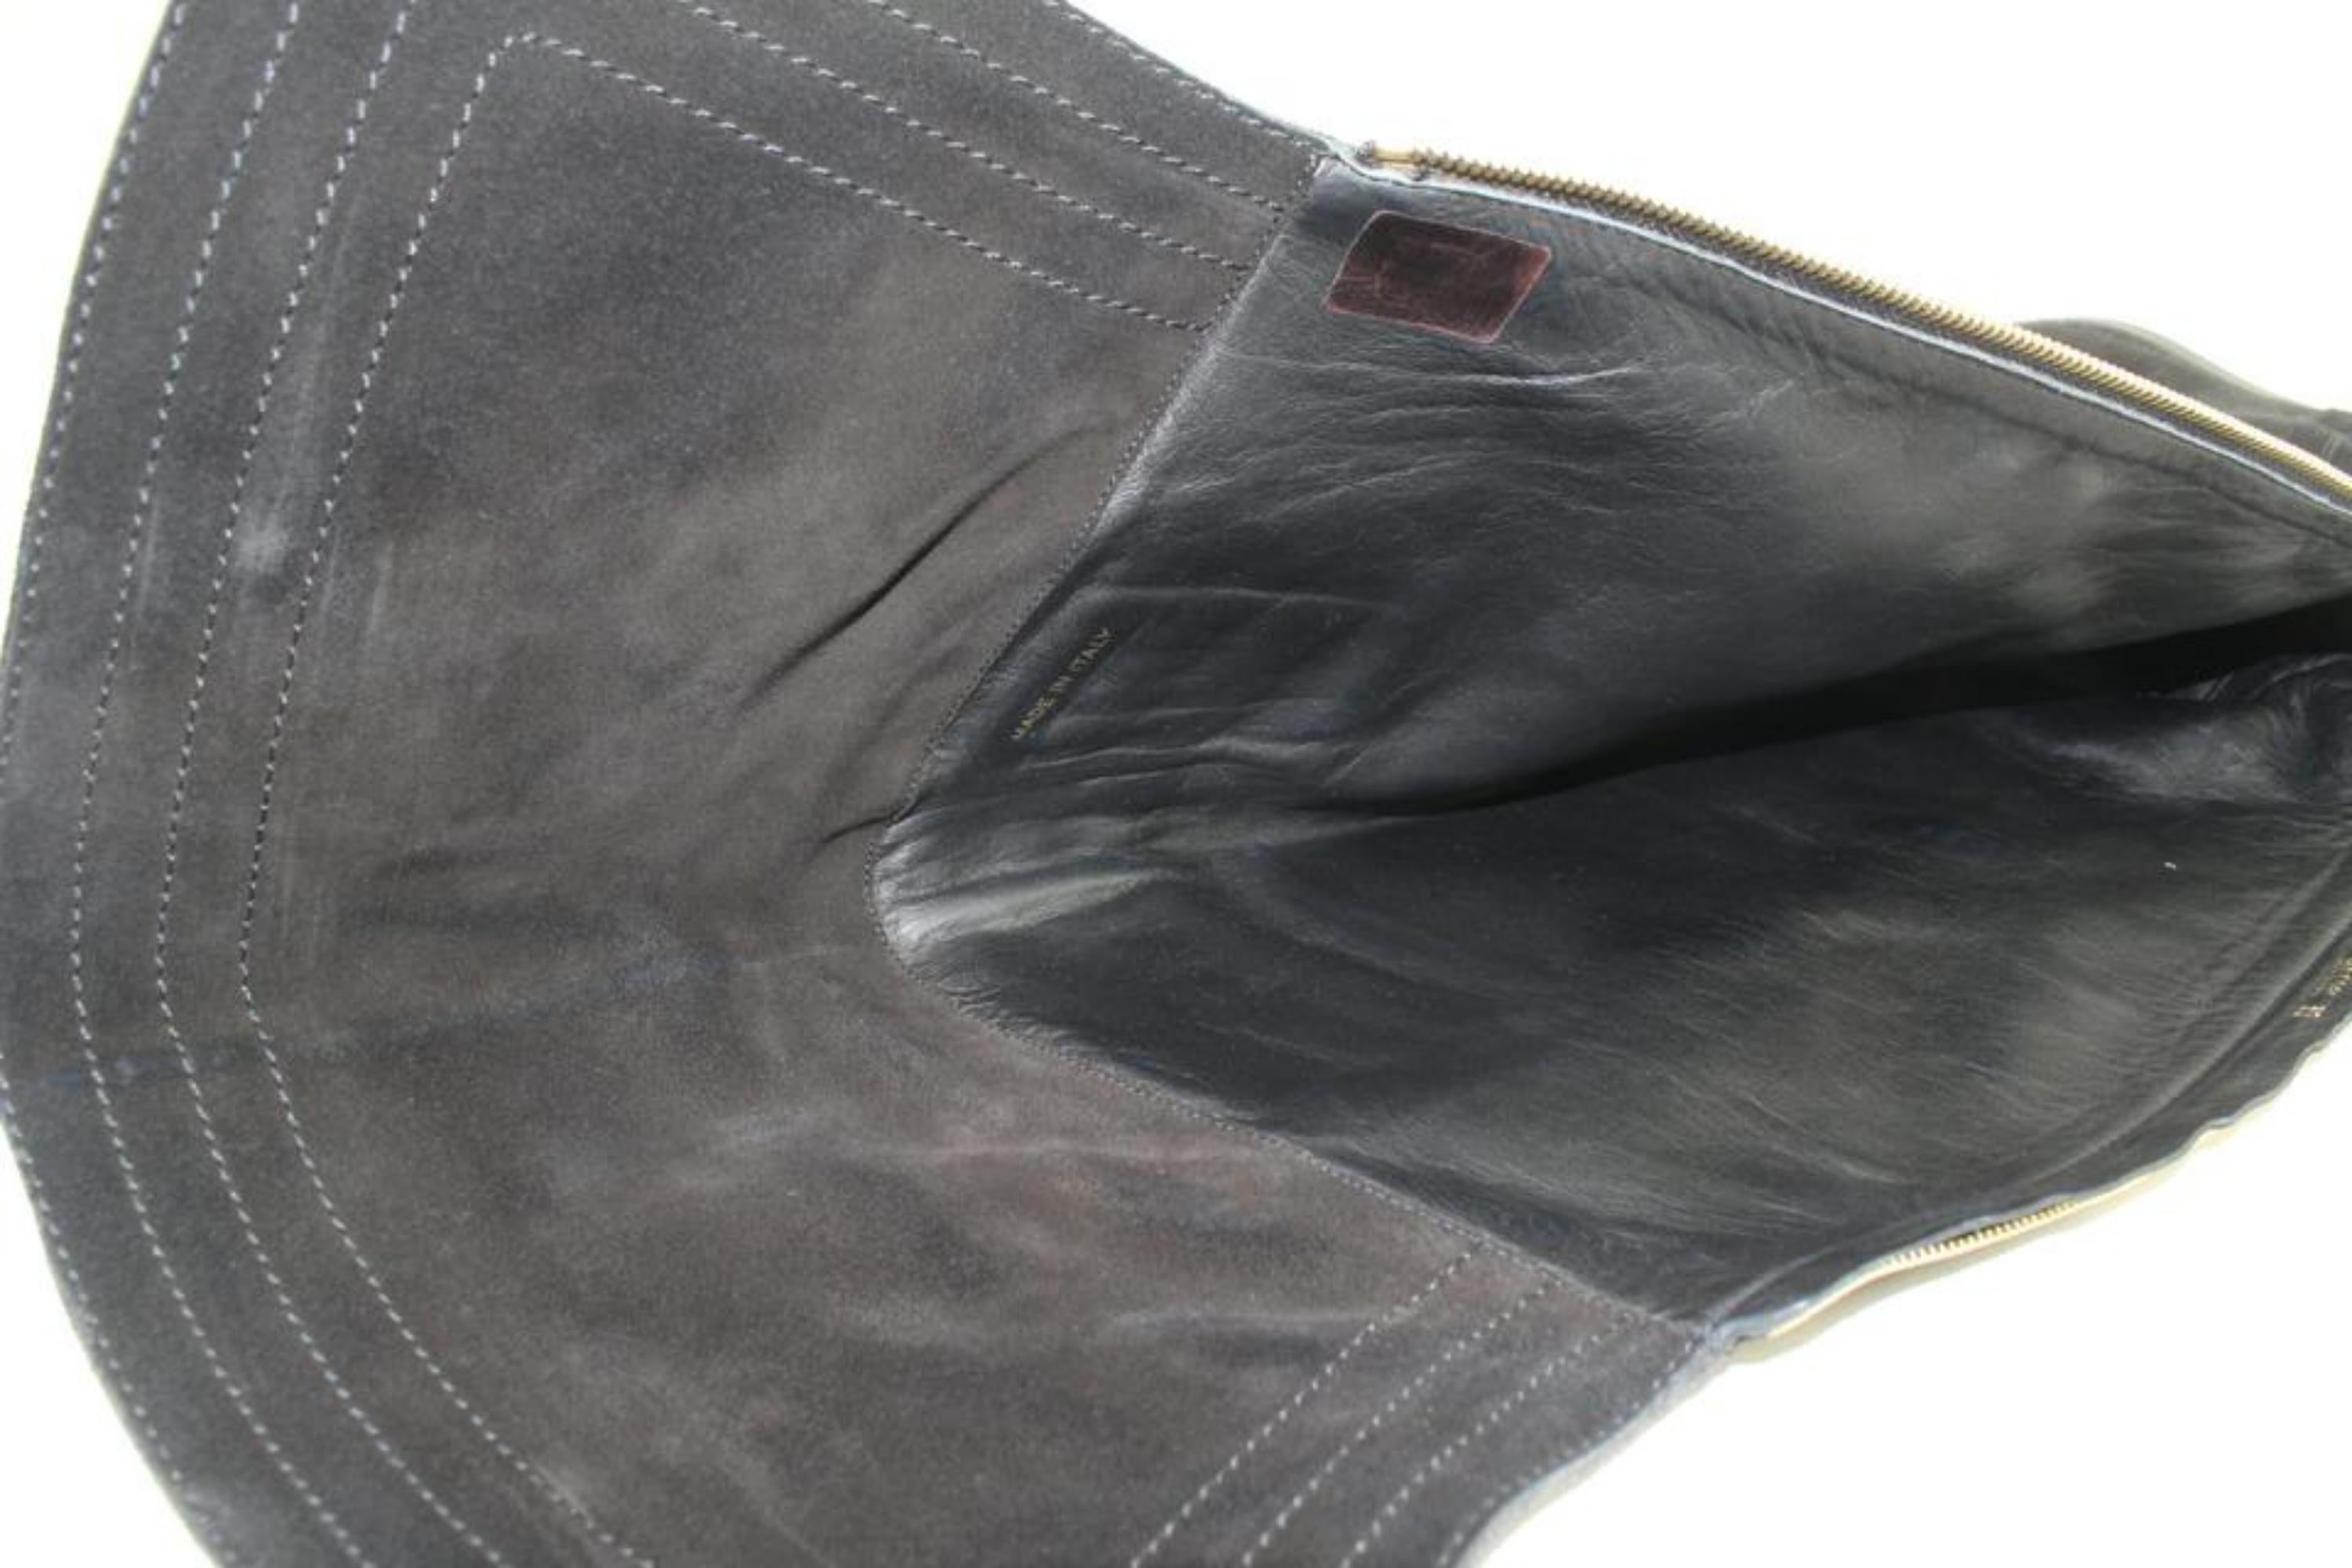 Louis Vuitton Size 35 Rare Black Suede Over the Knee Boots Moto Motorcycle 64lv3 For Sale 4